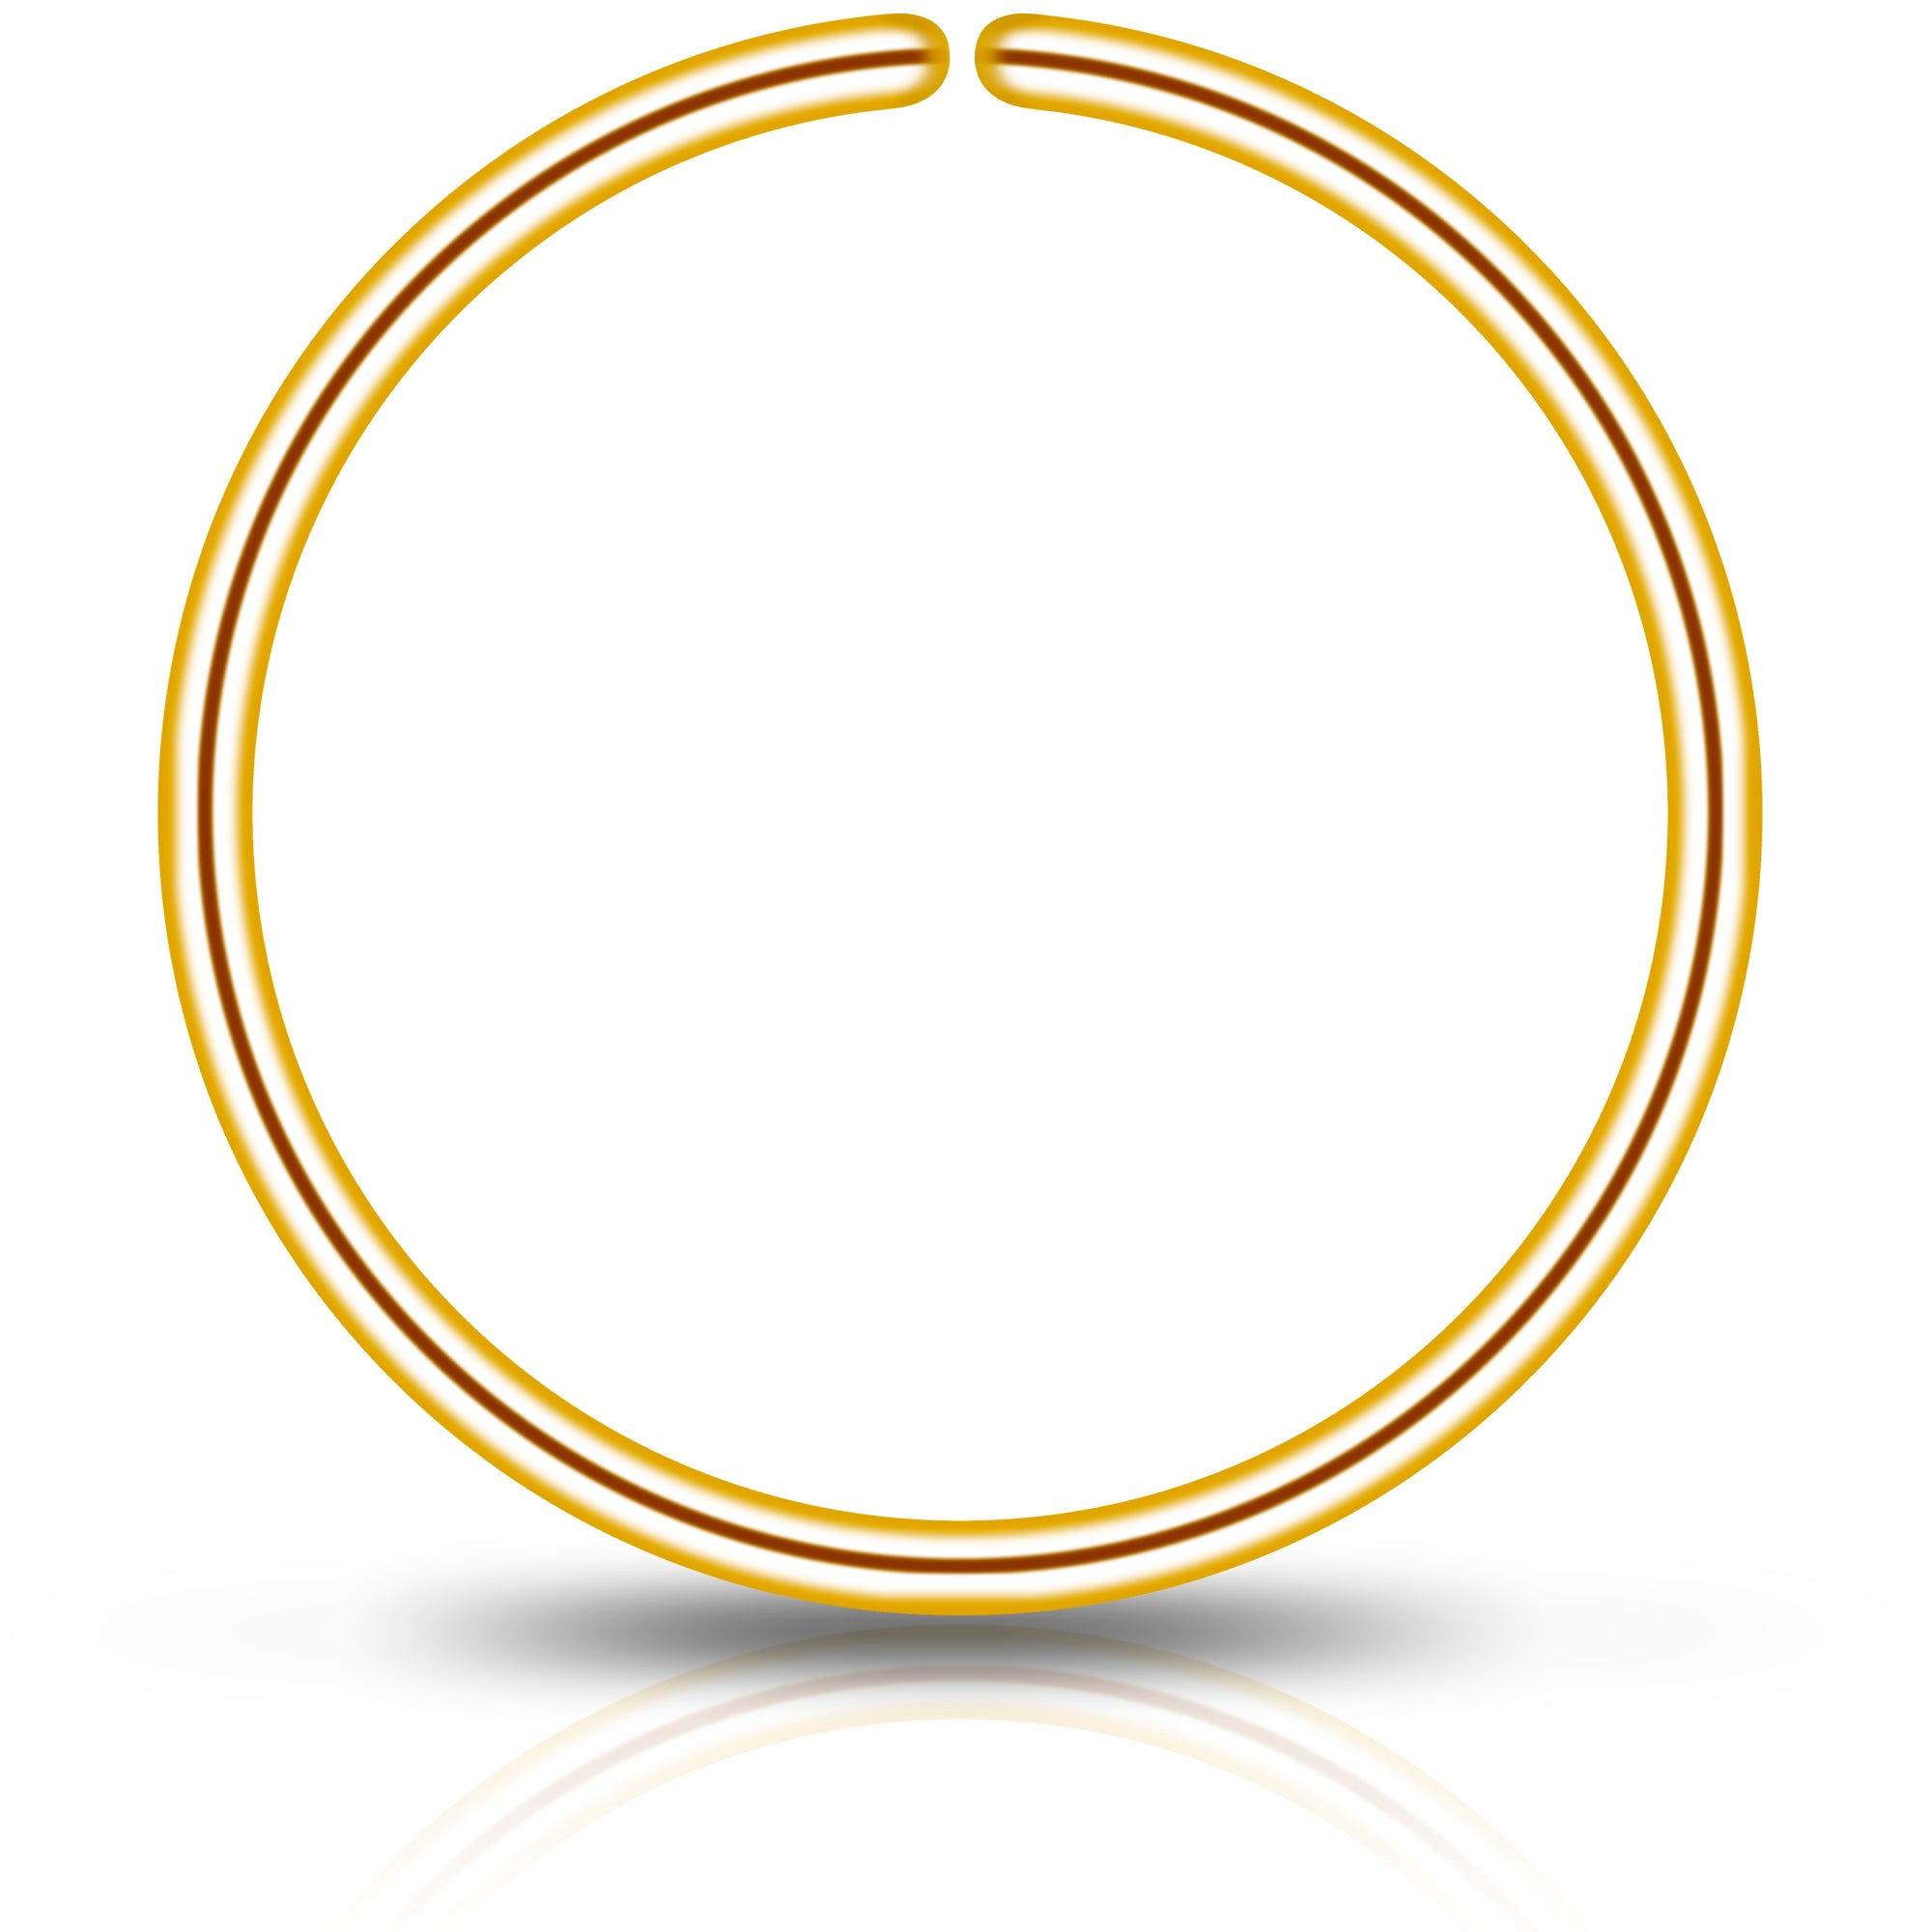 Single Hoop Nose 14k Yellow Gold Filled Nose Hoop Ring (Select Your Size)